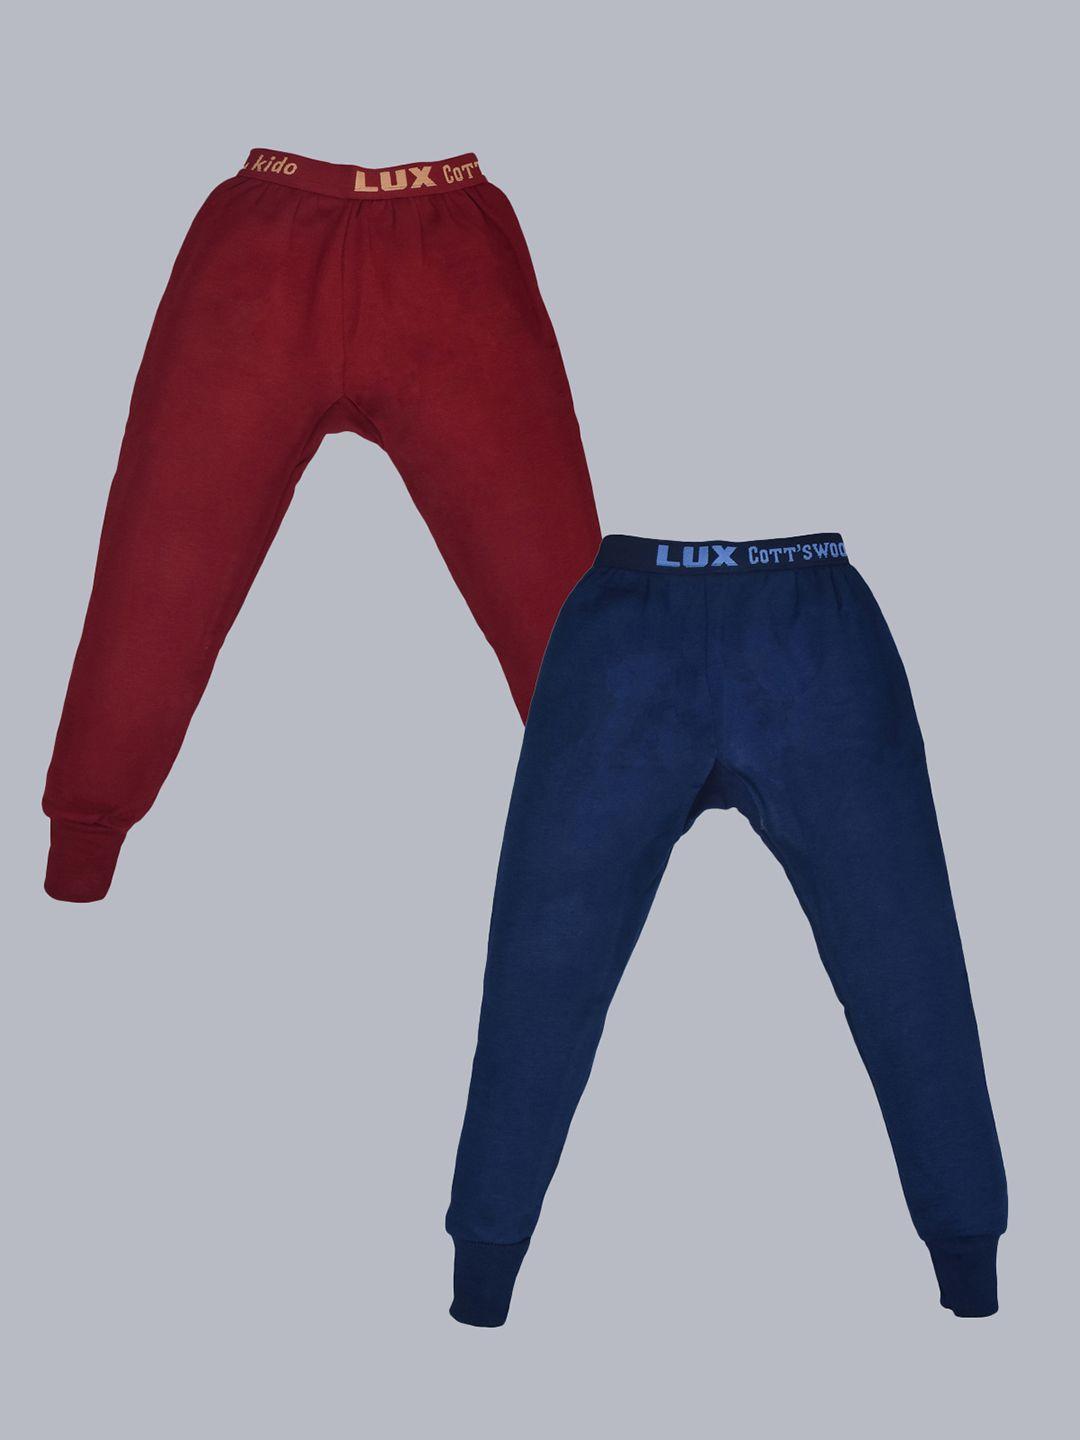 lux cottswool boys pack of 2 blue and maroon solid cotton thermal bottoms